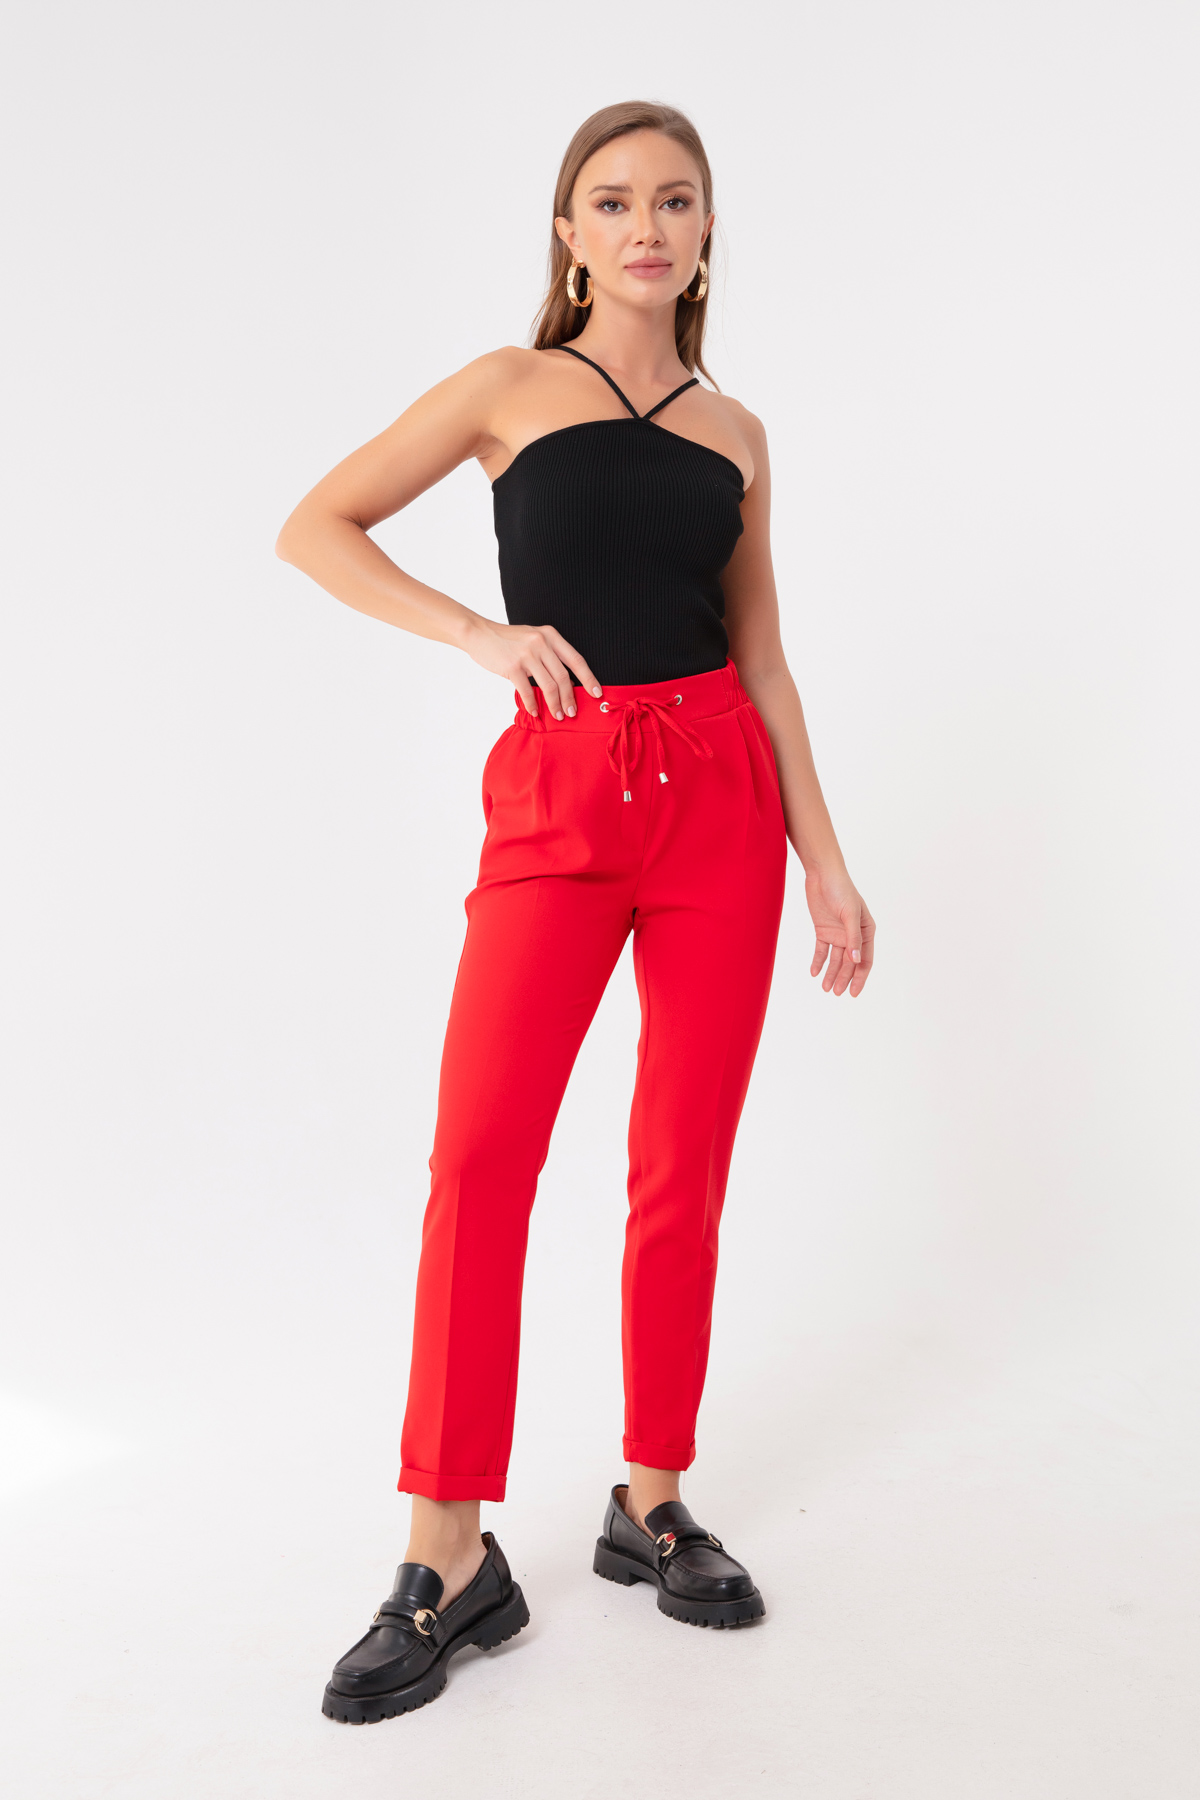 Women's Red Lace-Up Waist Trousers